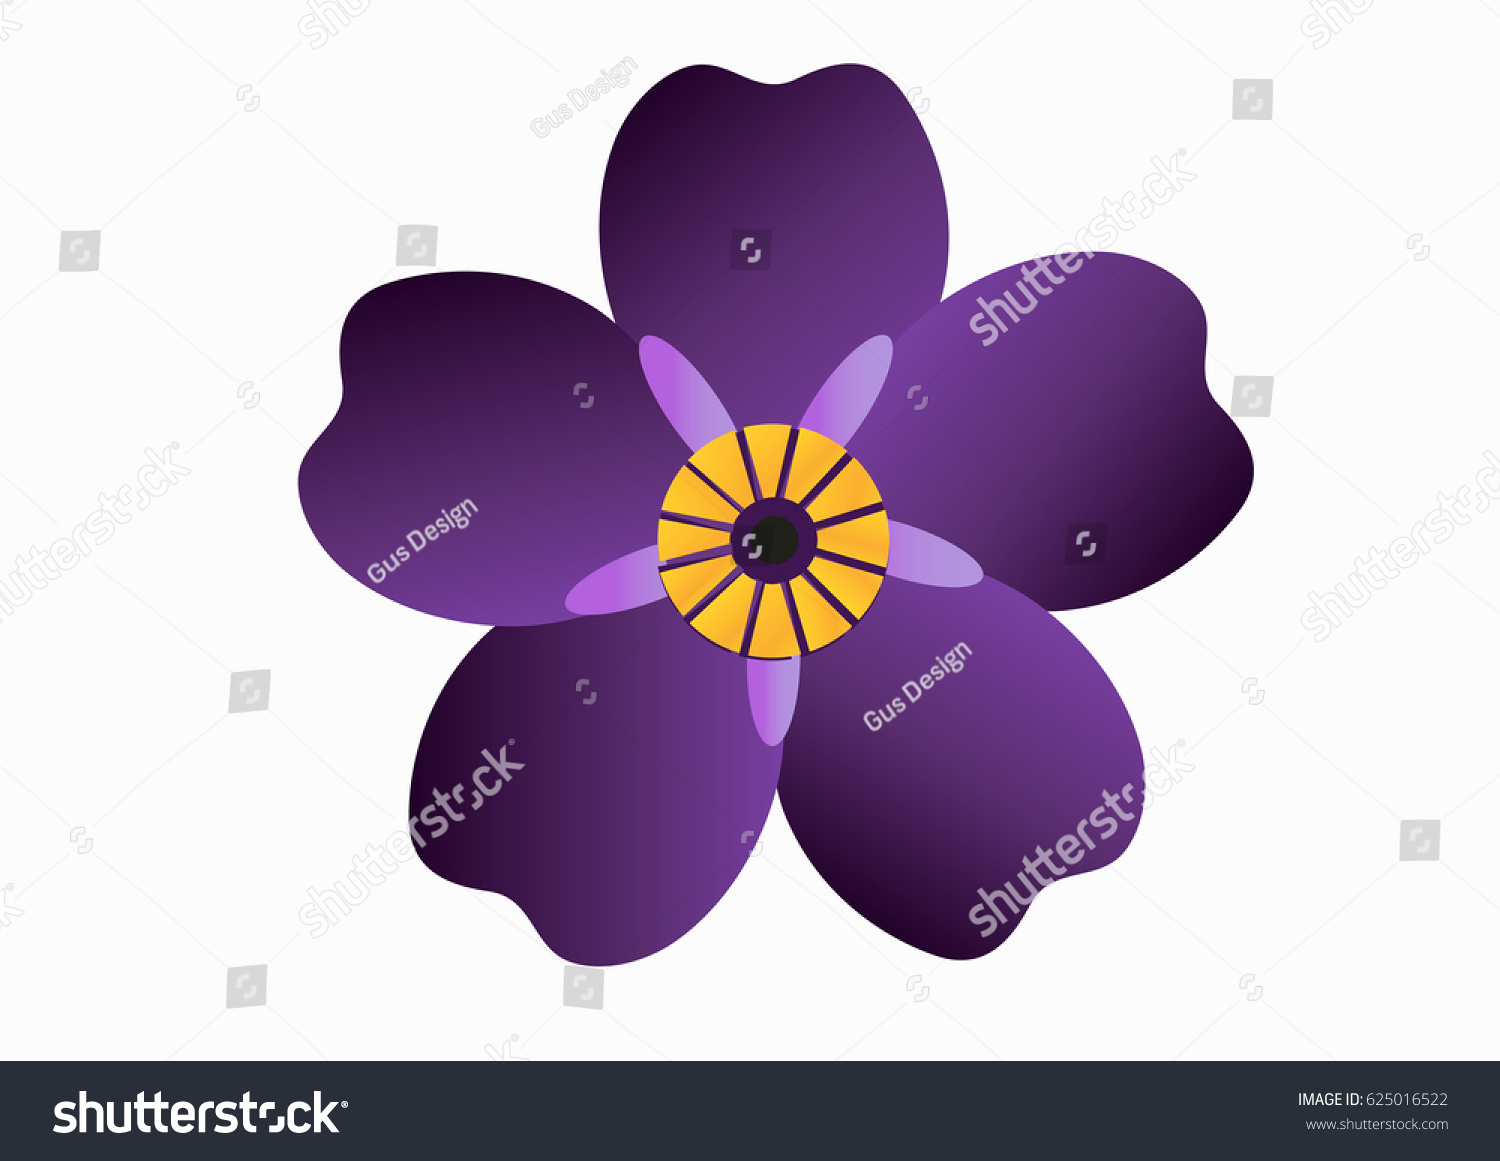 stock-vector-armenian-genocide-remembrance-day-625016522